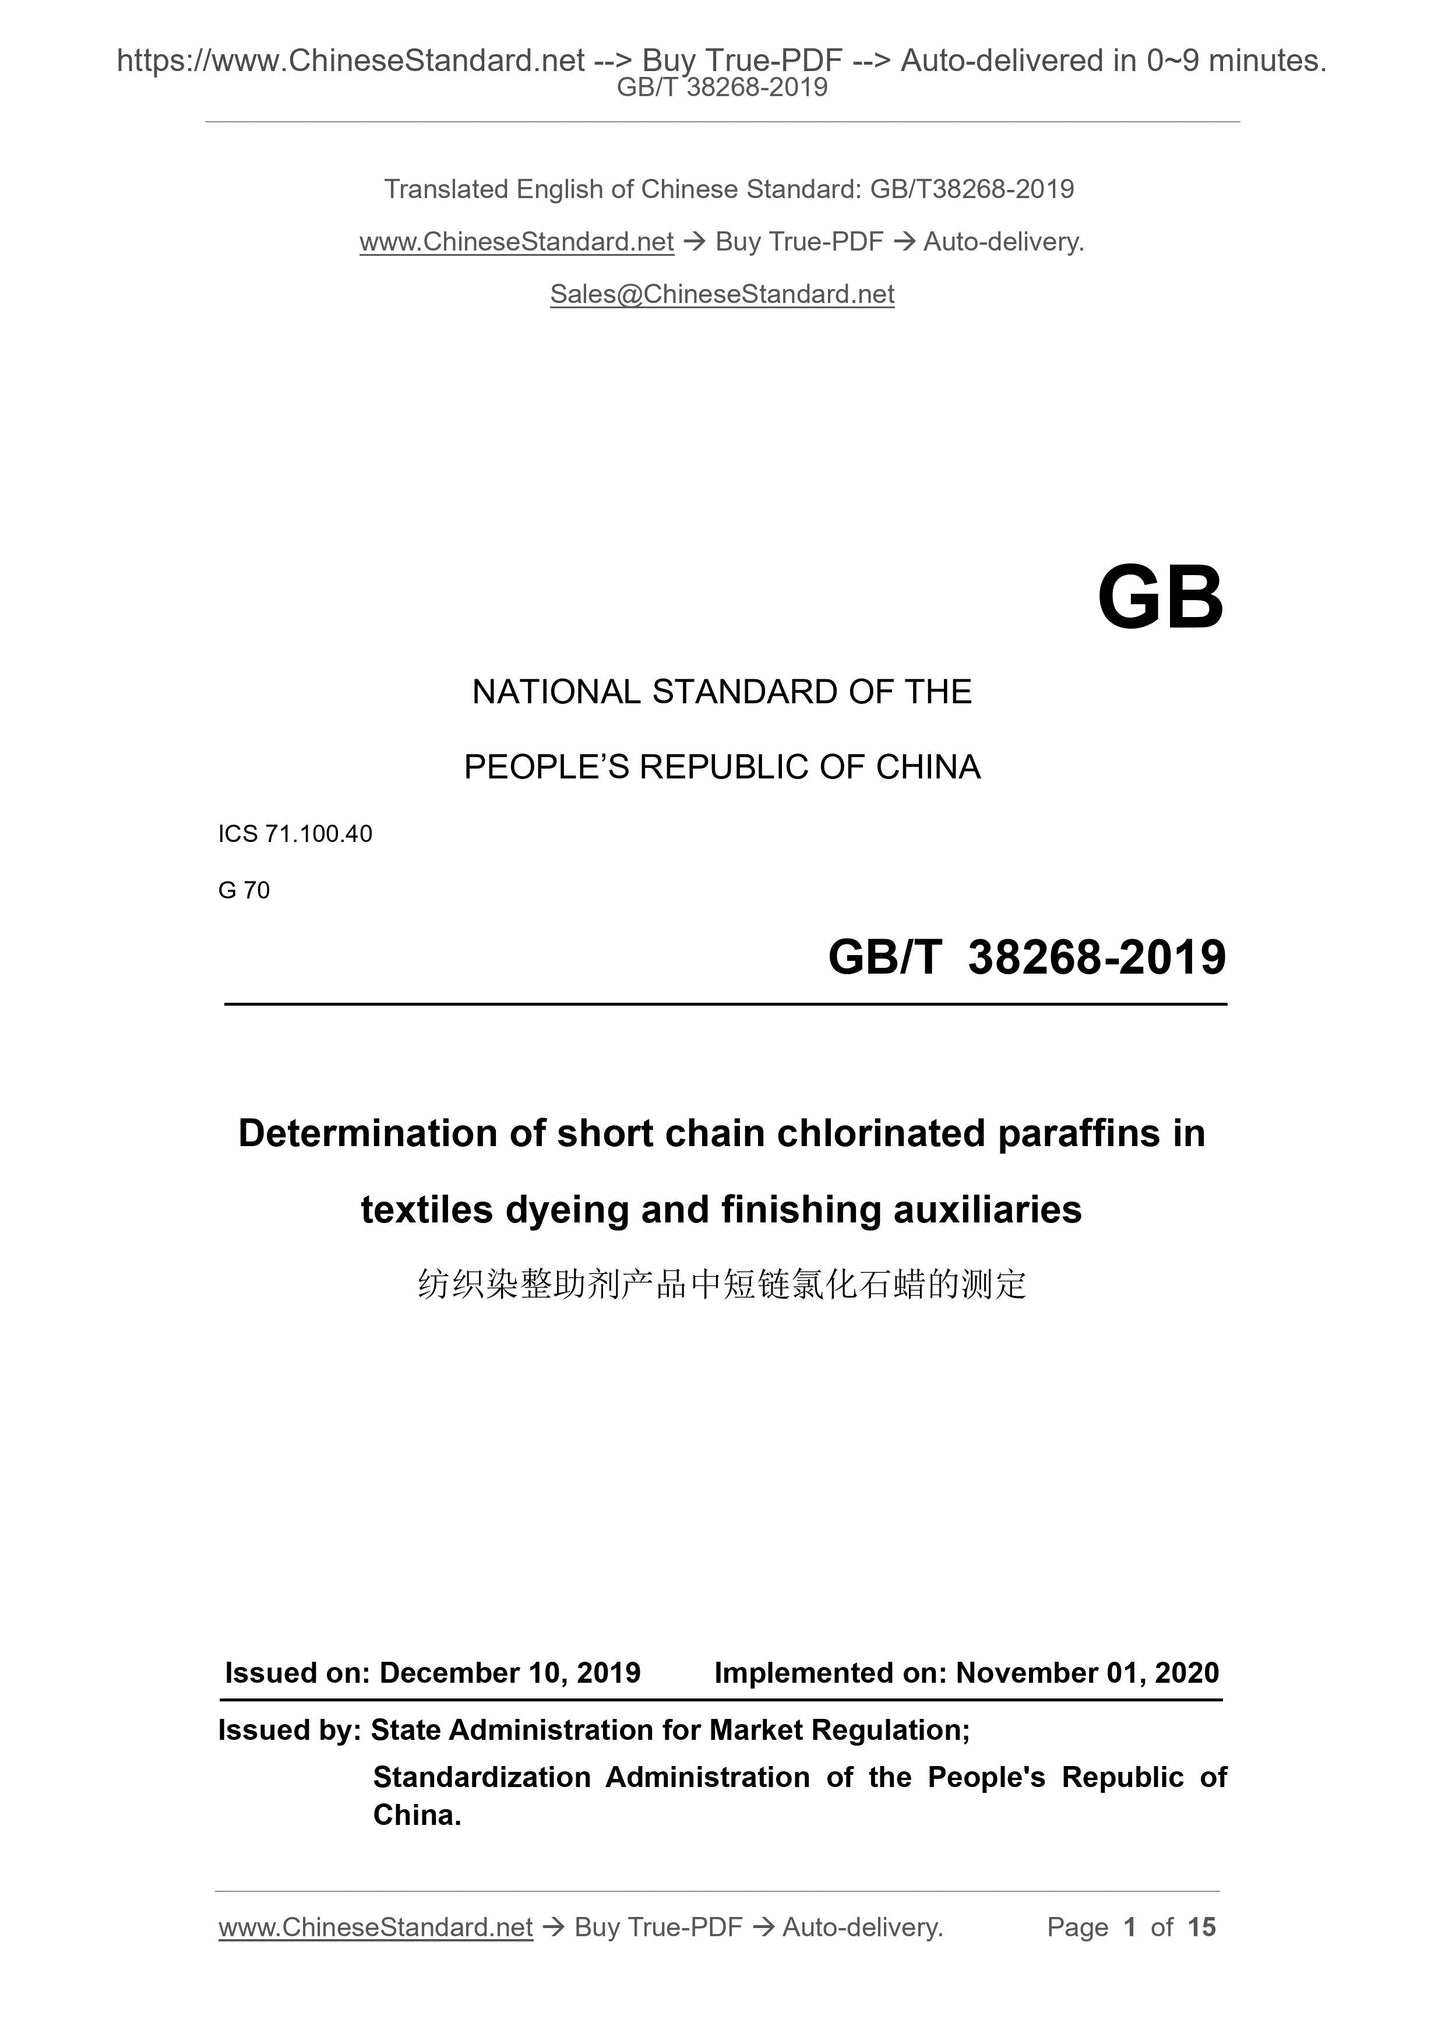 GB/T 38268-2019 Page 1